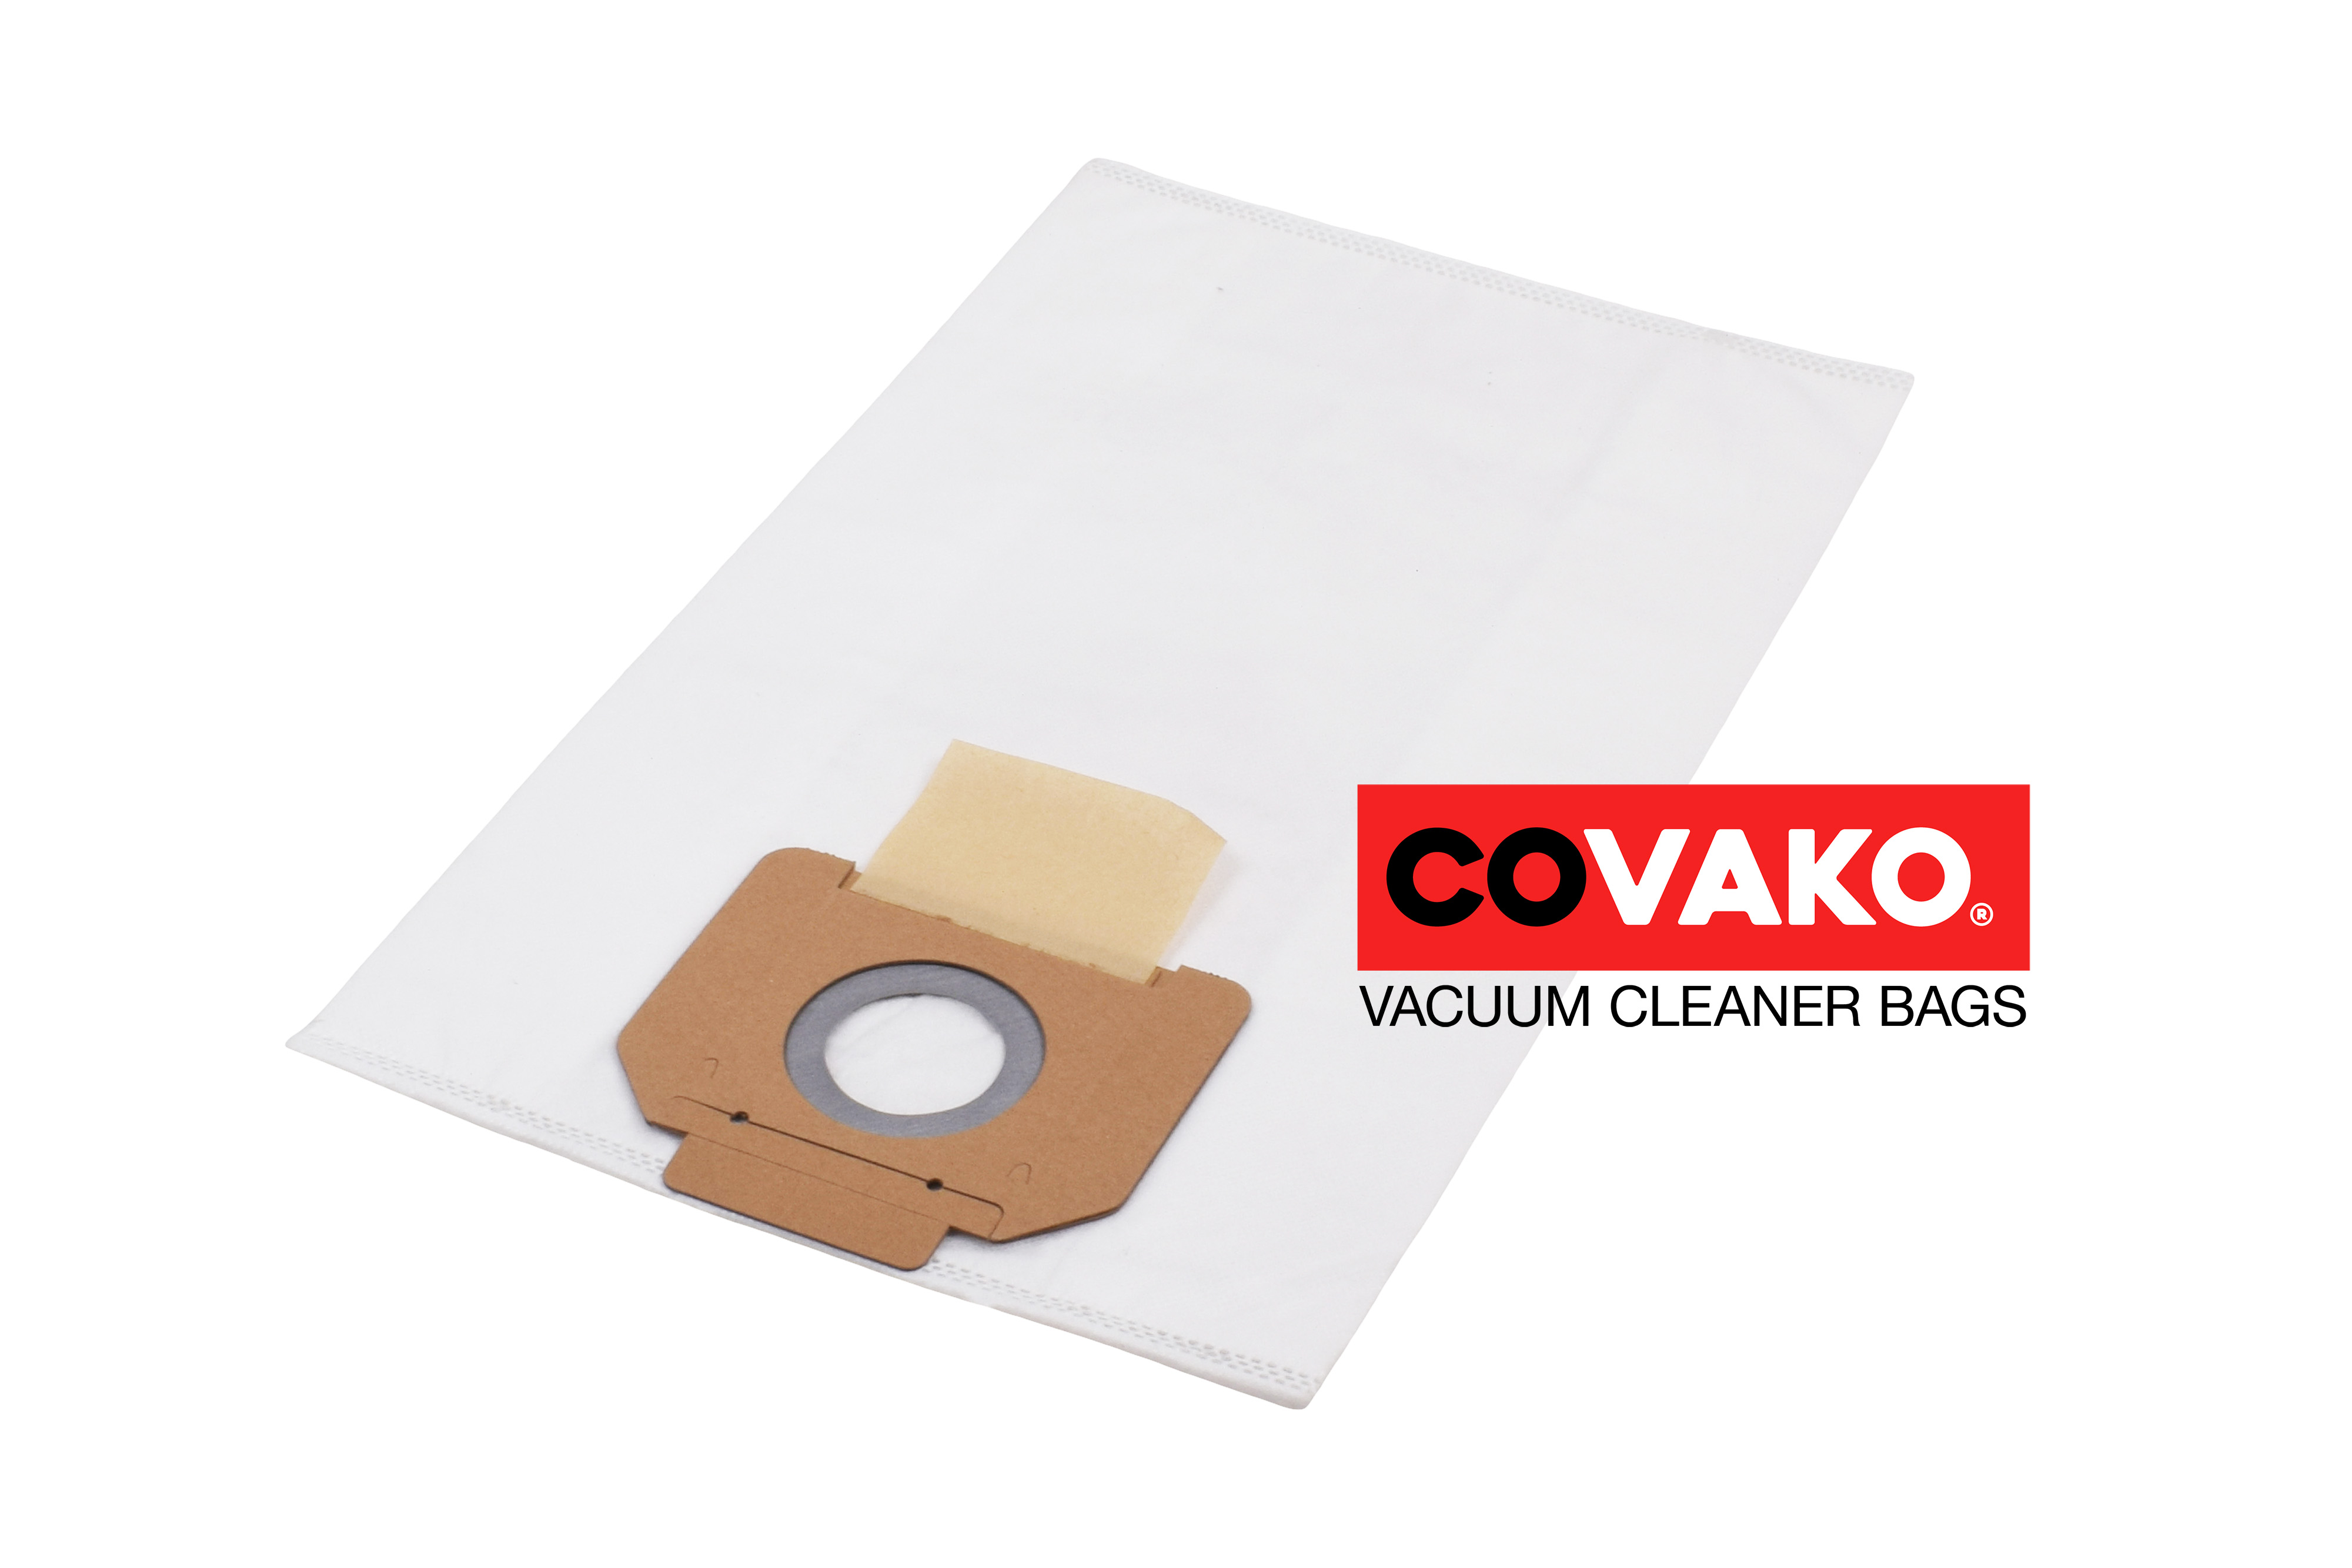 Gansow G 10P + ECO / Synthesis - Gansow vacuum cleaner bags